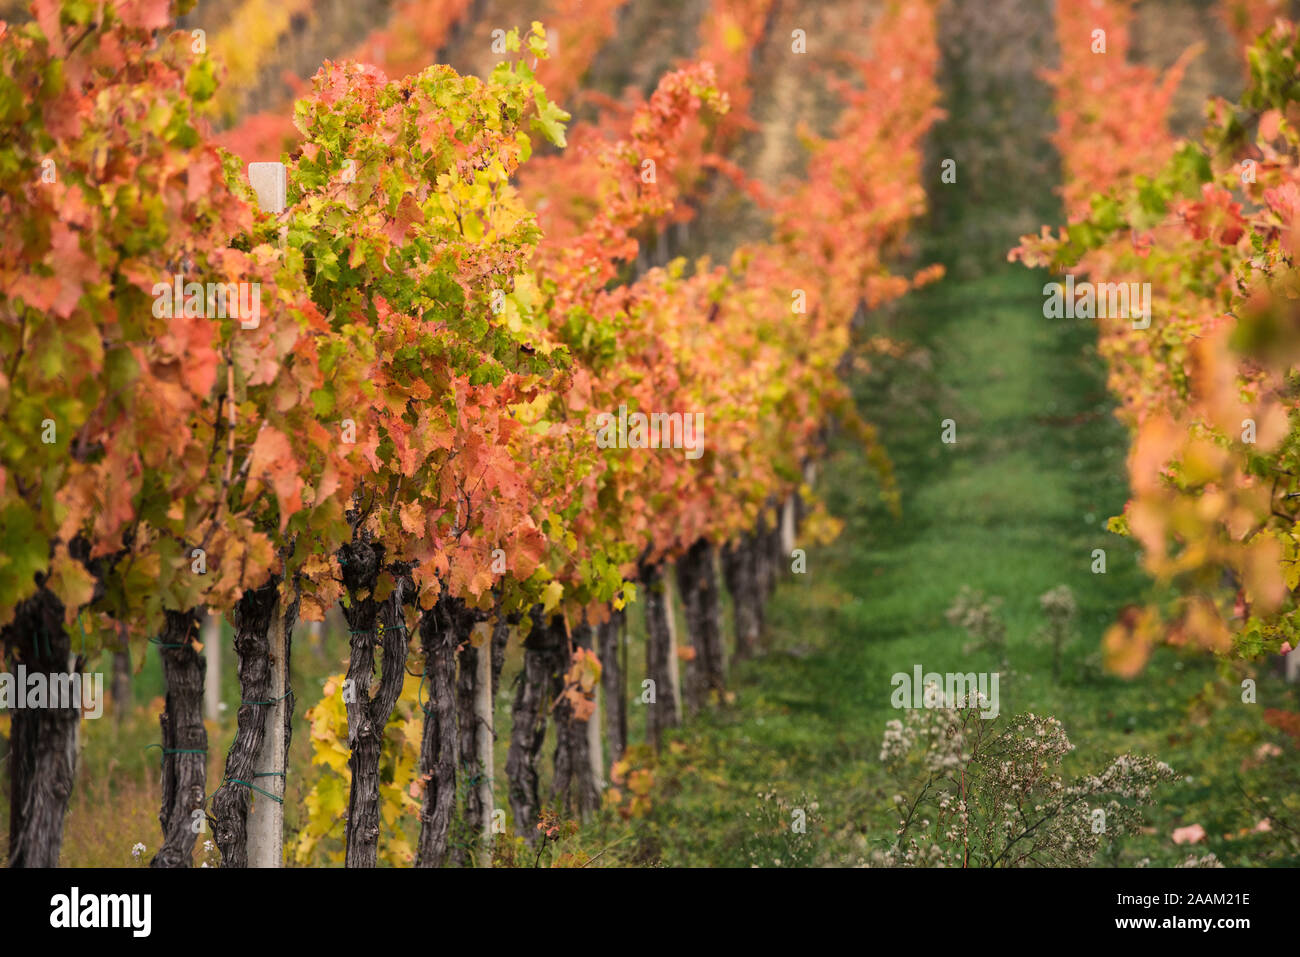 Montefalco, Perugia, Umbria, Italy. The vineyards of the countryside around Montefalco and Bevagna in the magical colors of red and yellow in autumn. Stock Photo